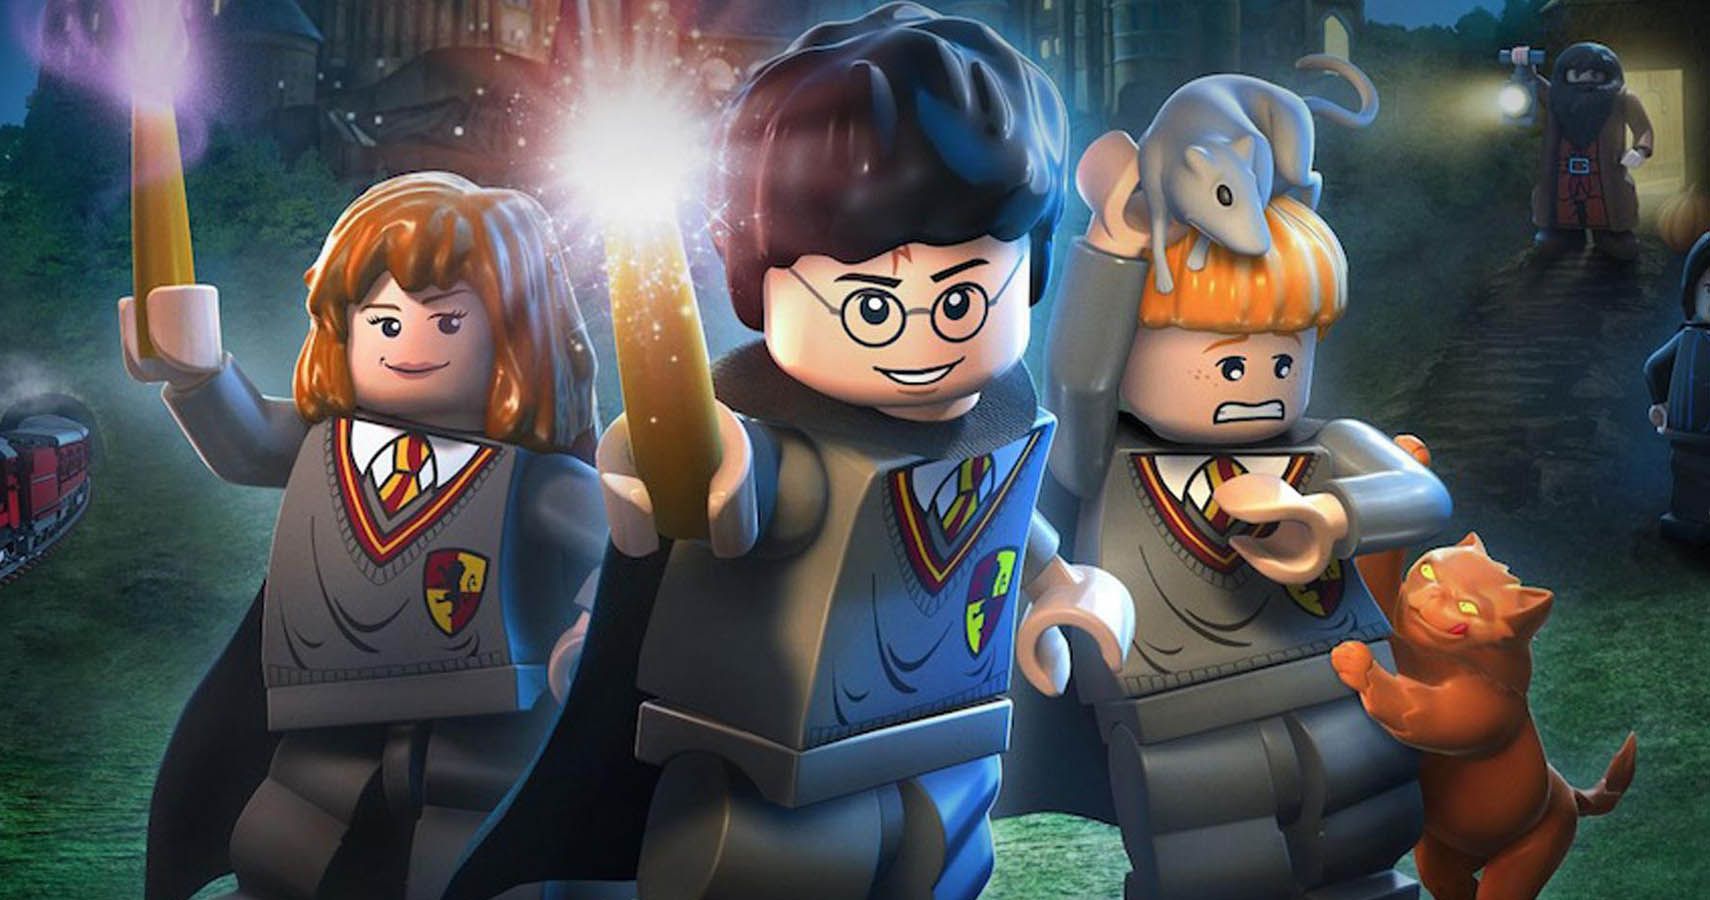 Lego Harry Potter featured image. Harry Potter, Ron Weasley and Hermione Granger in plastic, shiny form